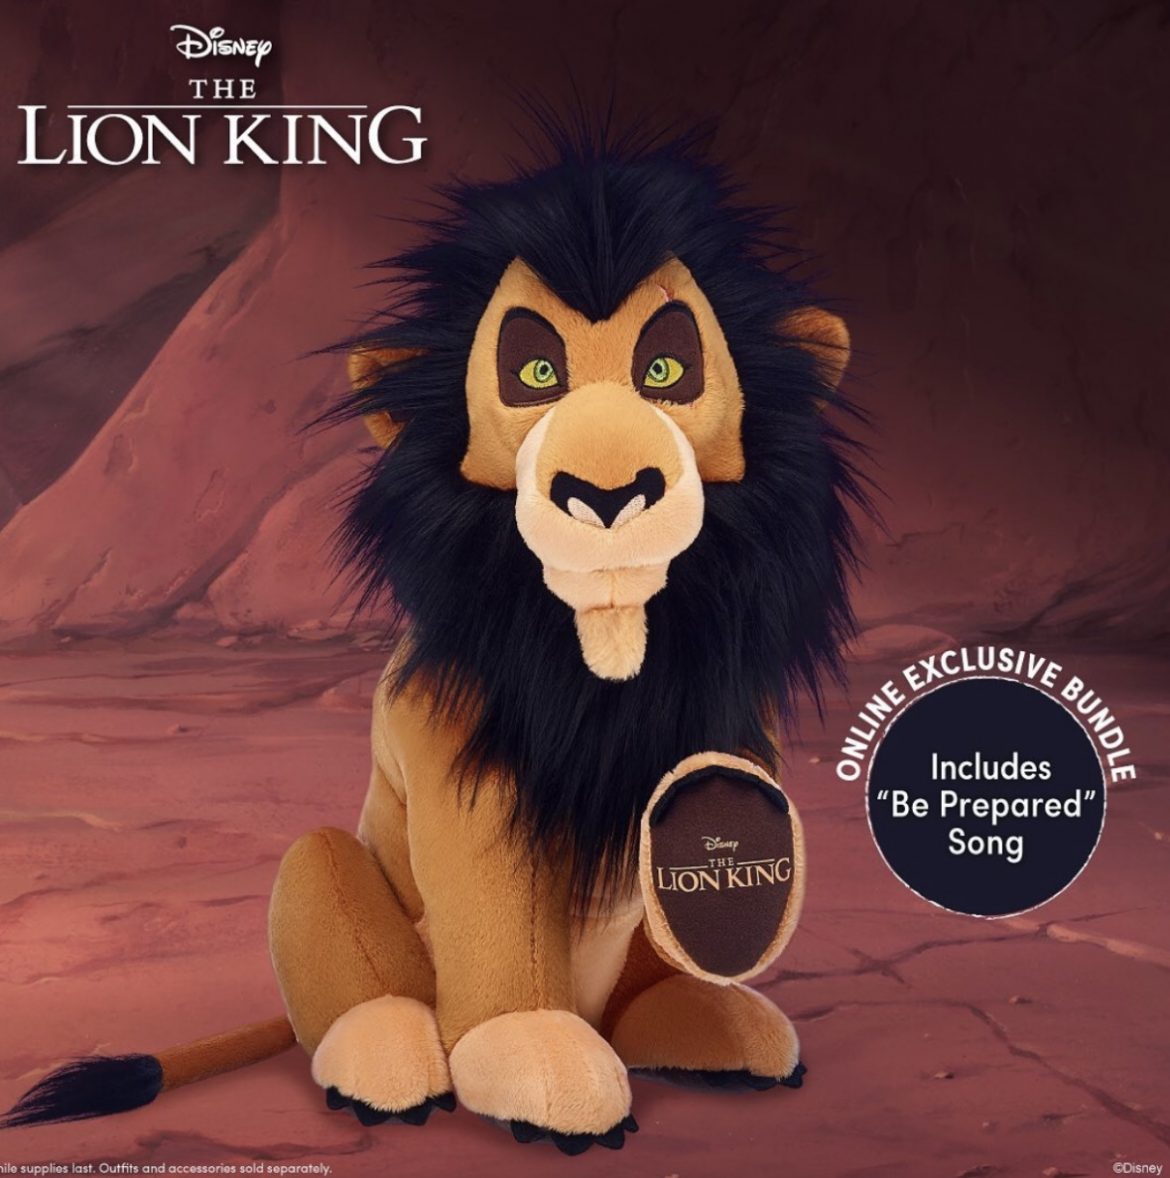 New Scar Collector’s Item coming to Build a Bear